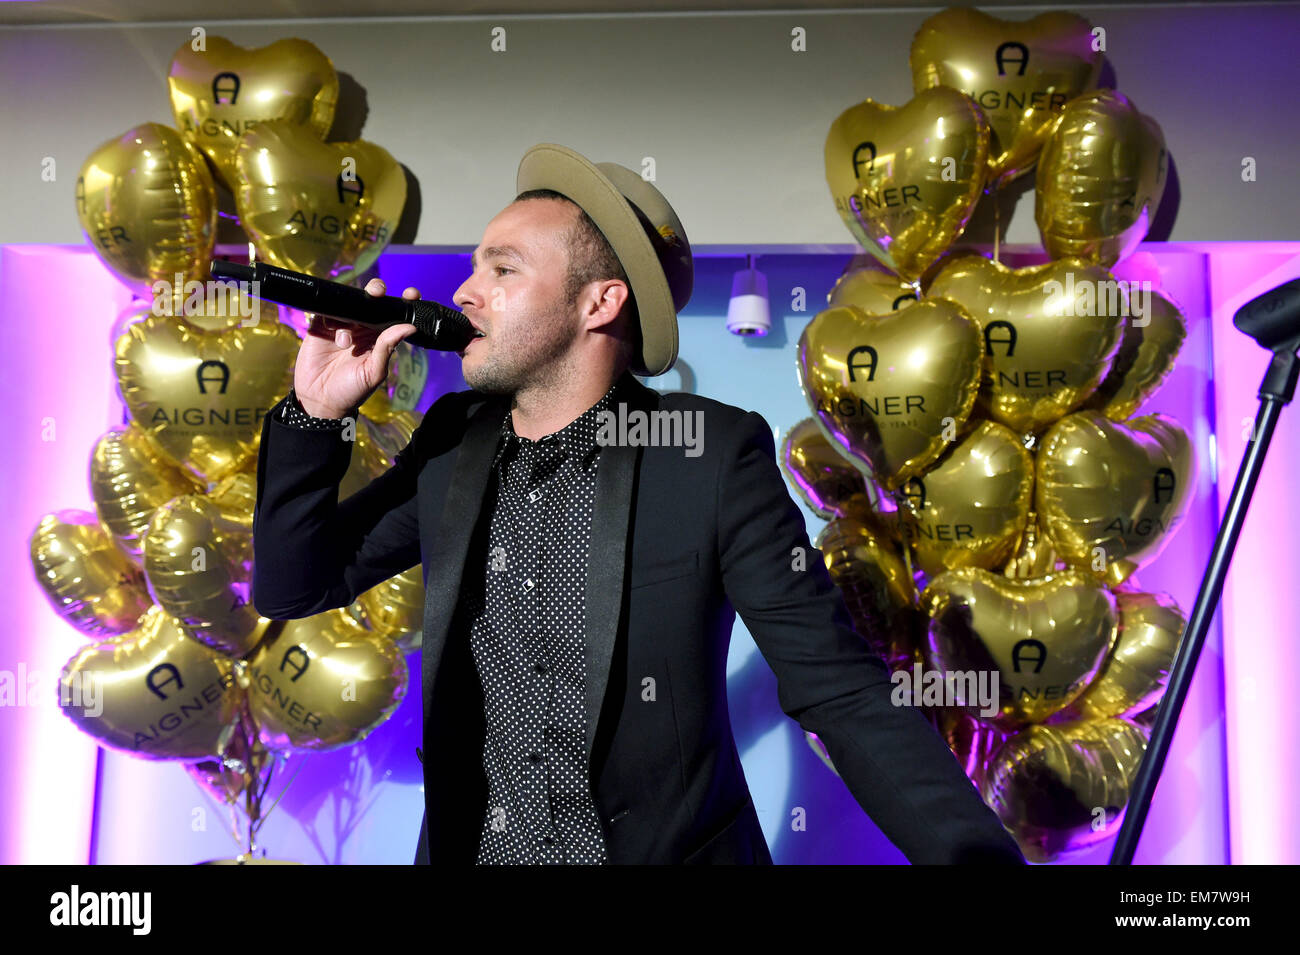 Munich, Germany. 16th Apr, 2015. British musician Marlon Roudette performs at the event 'Aigner - Celebrating 50 Years' at the Aigner Shop in Munich, Germany, 16 April 2015. Photo: FELIX HOERHAGER/dpa/Alamy Live News Stock Photo